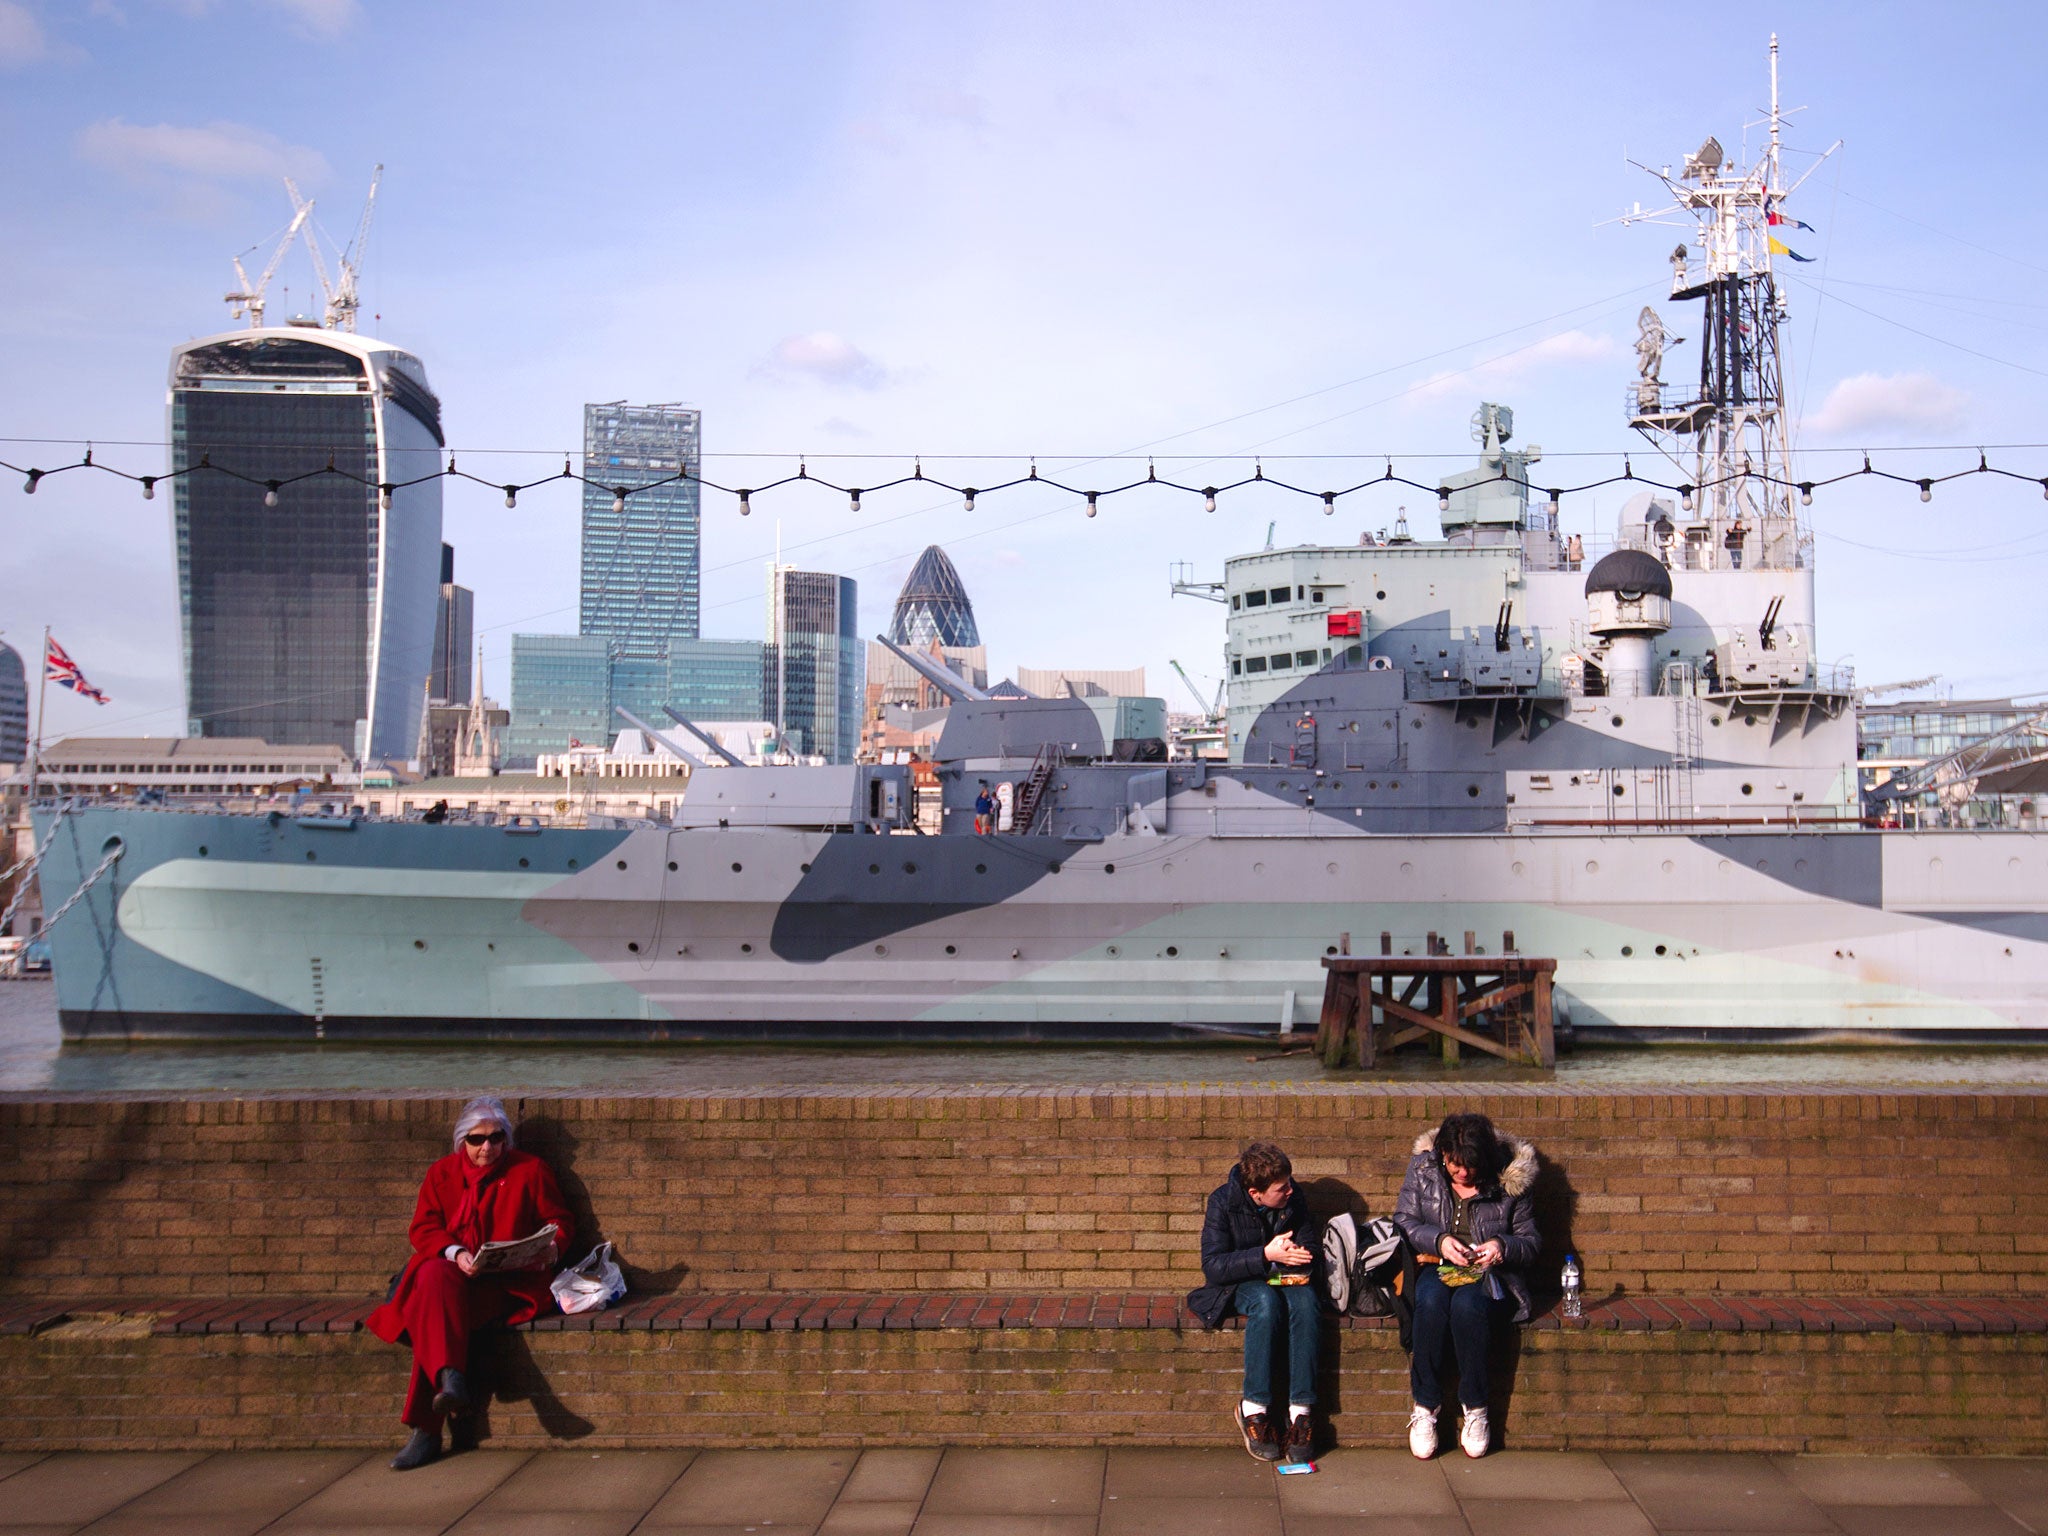 People sit in the sunshine with HMS Belfast on the River Thames in the background in central London